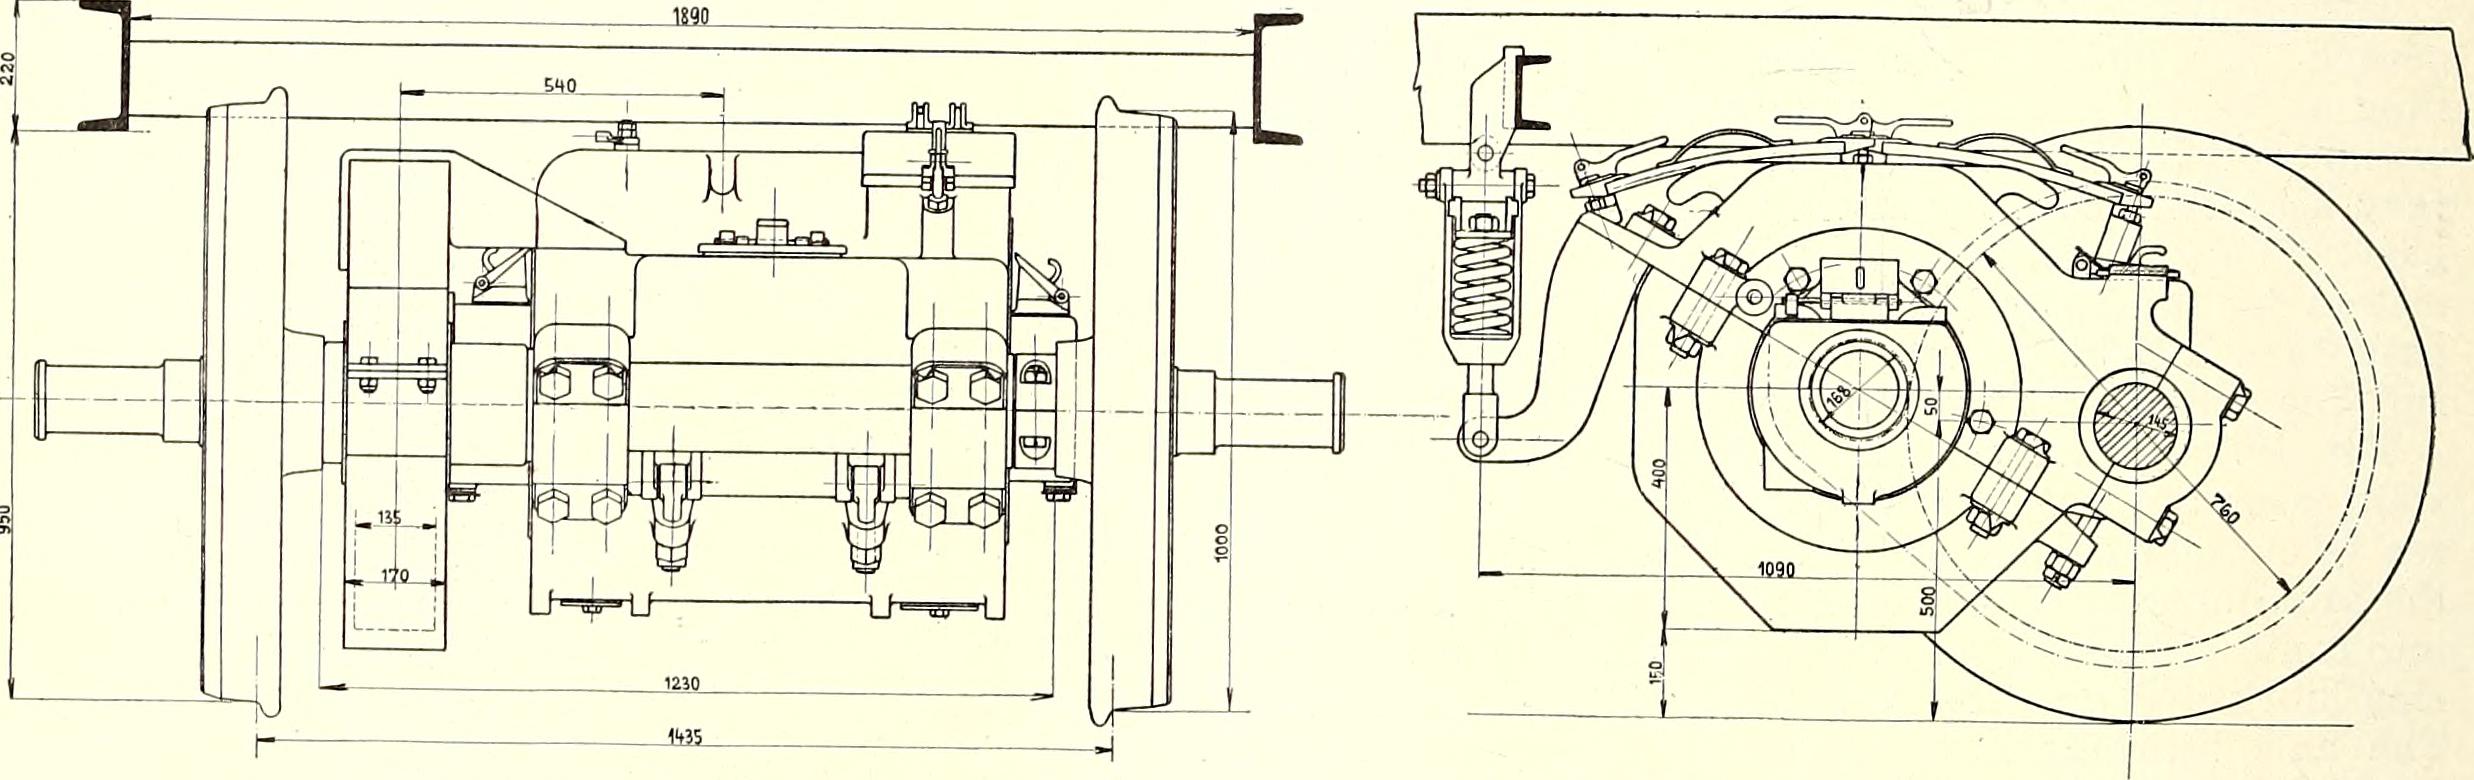 Image from page 793 of "Electric railway journal" (1908)